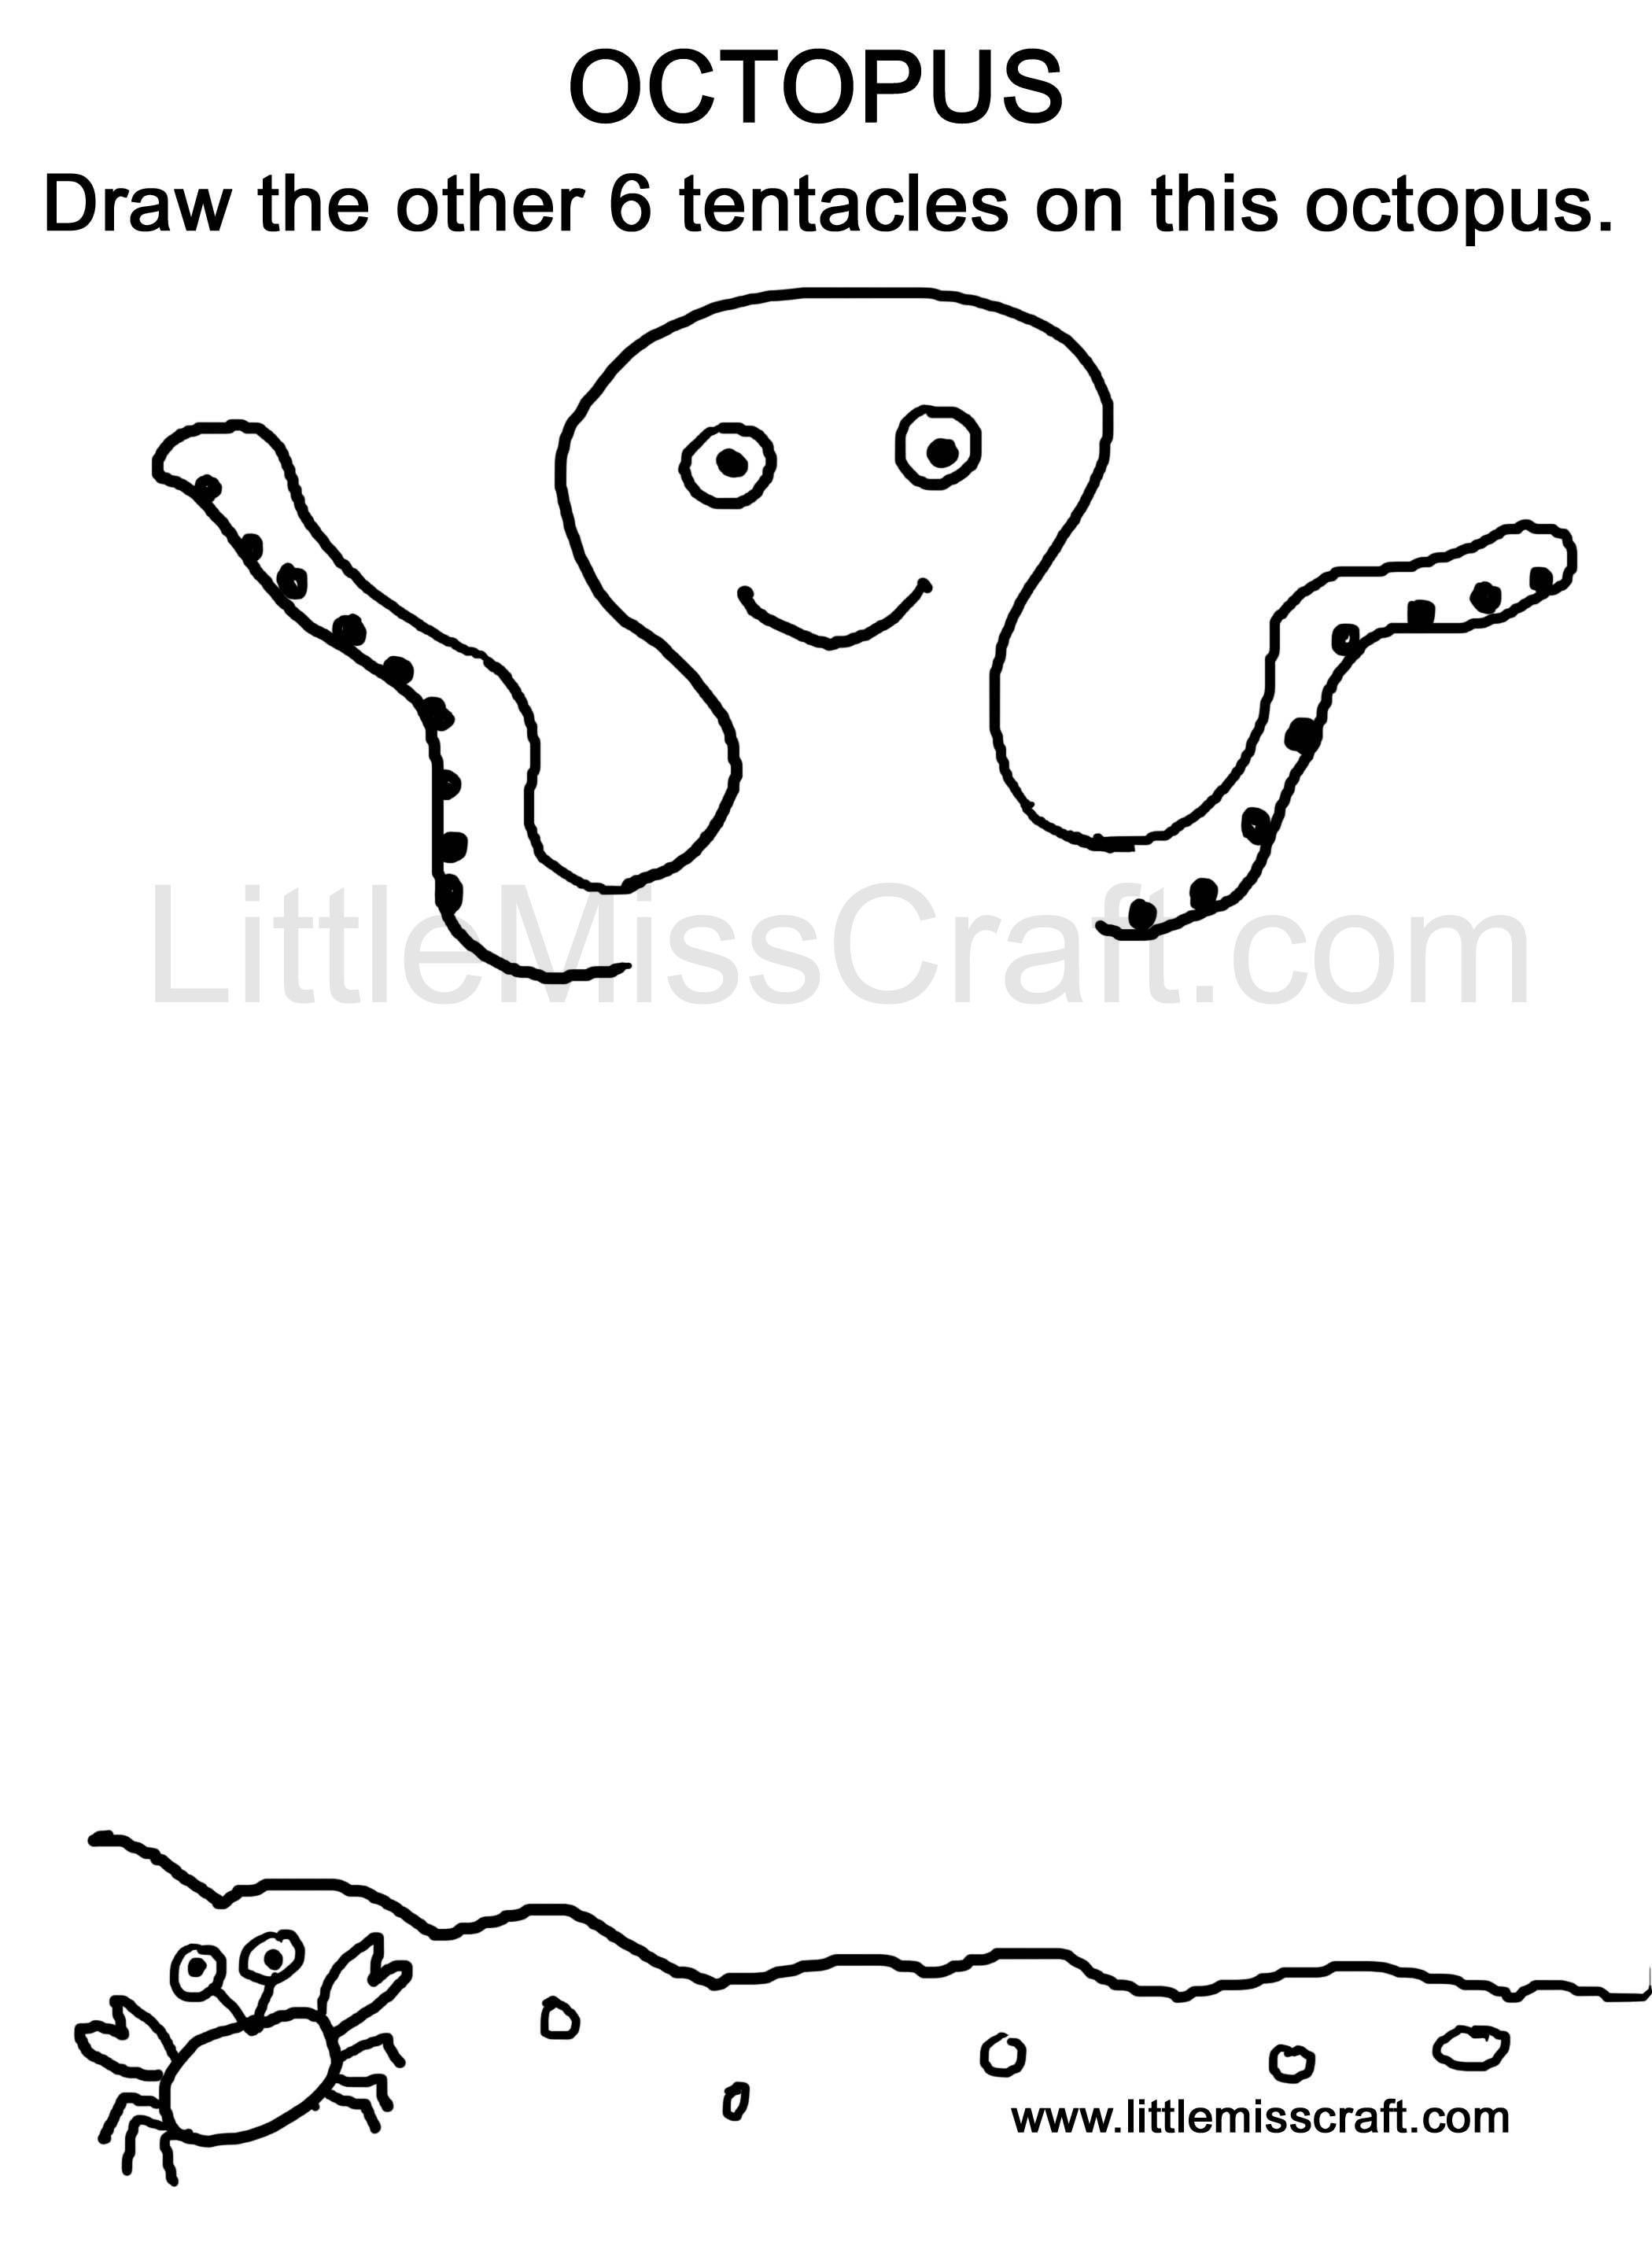 Sea Creatures Octopus Doodle Coloring Page